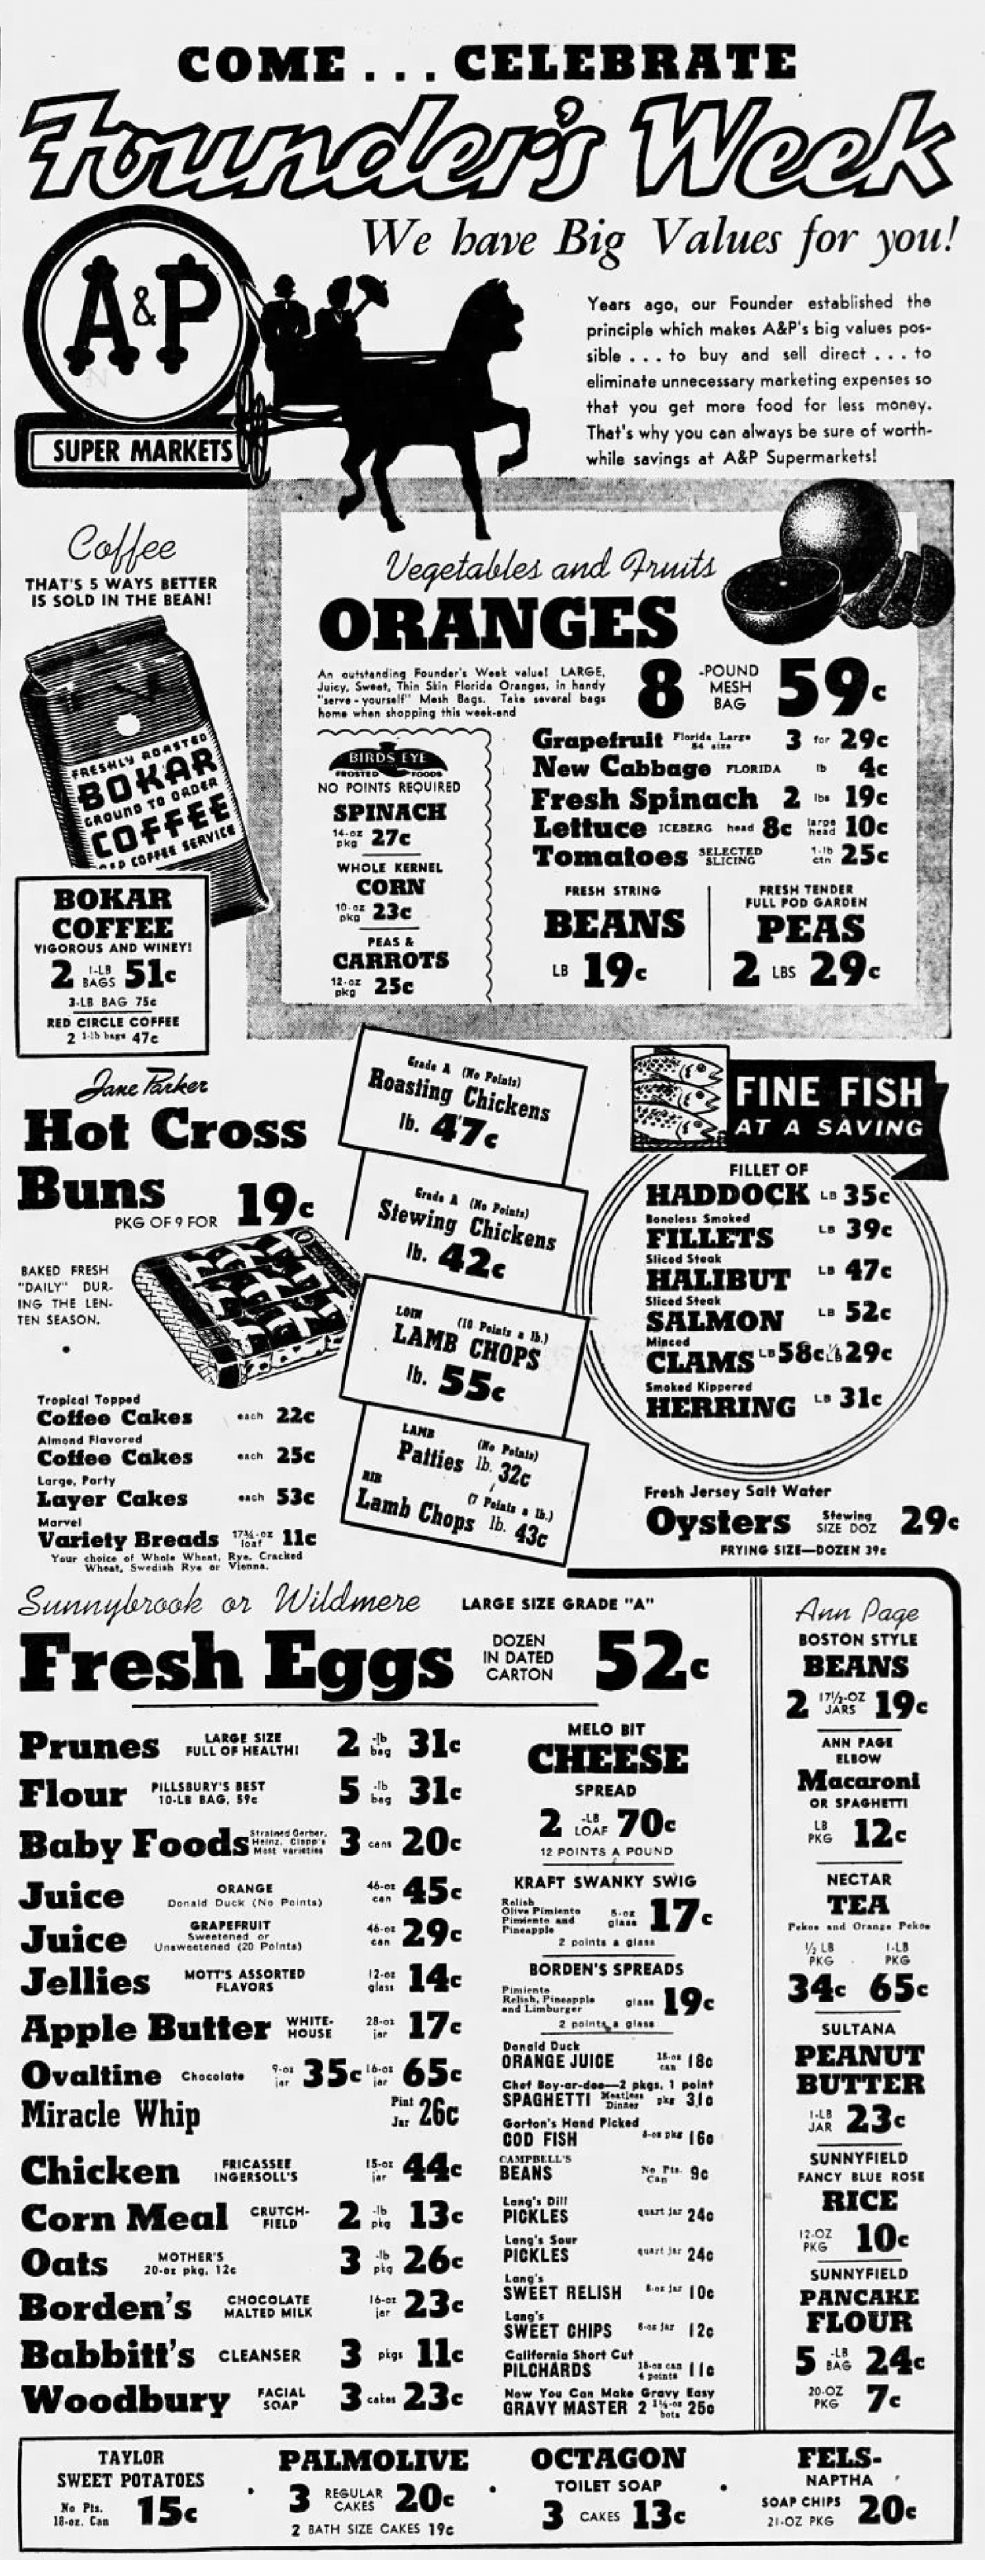 Grocery advertisment showing items and sale prices. There are an exhausting amount of items consuming the entire page